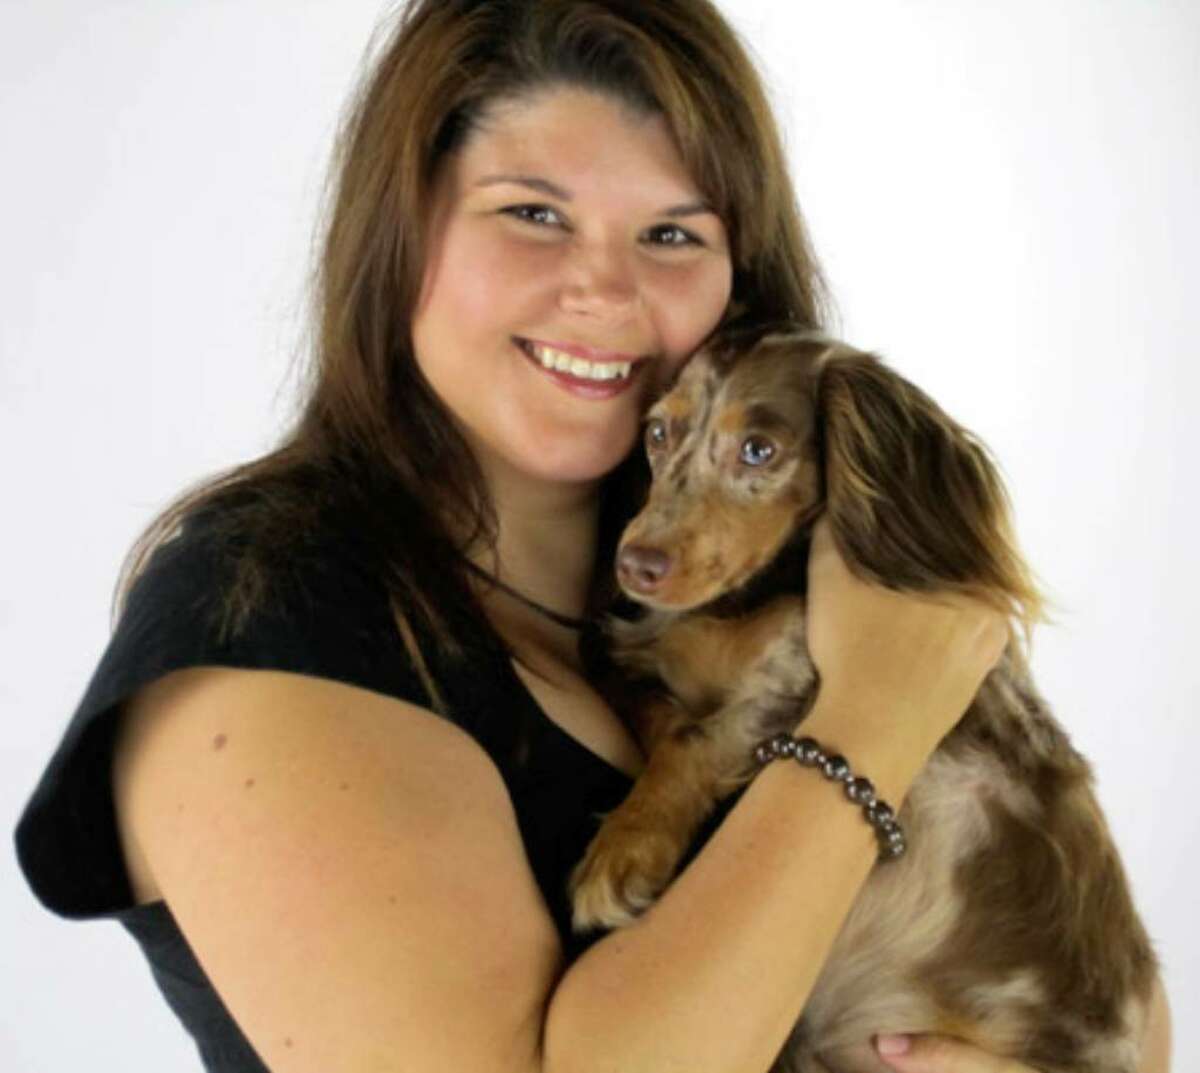 Holly Hirshberg holds Rainbow, who won second place in the Bissell Most Valuable Pet online contest. Rainbow’s photo will appear on Bissell products.